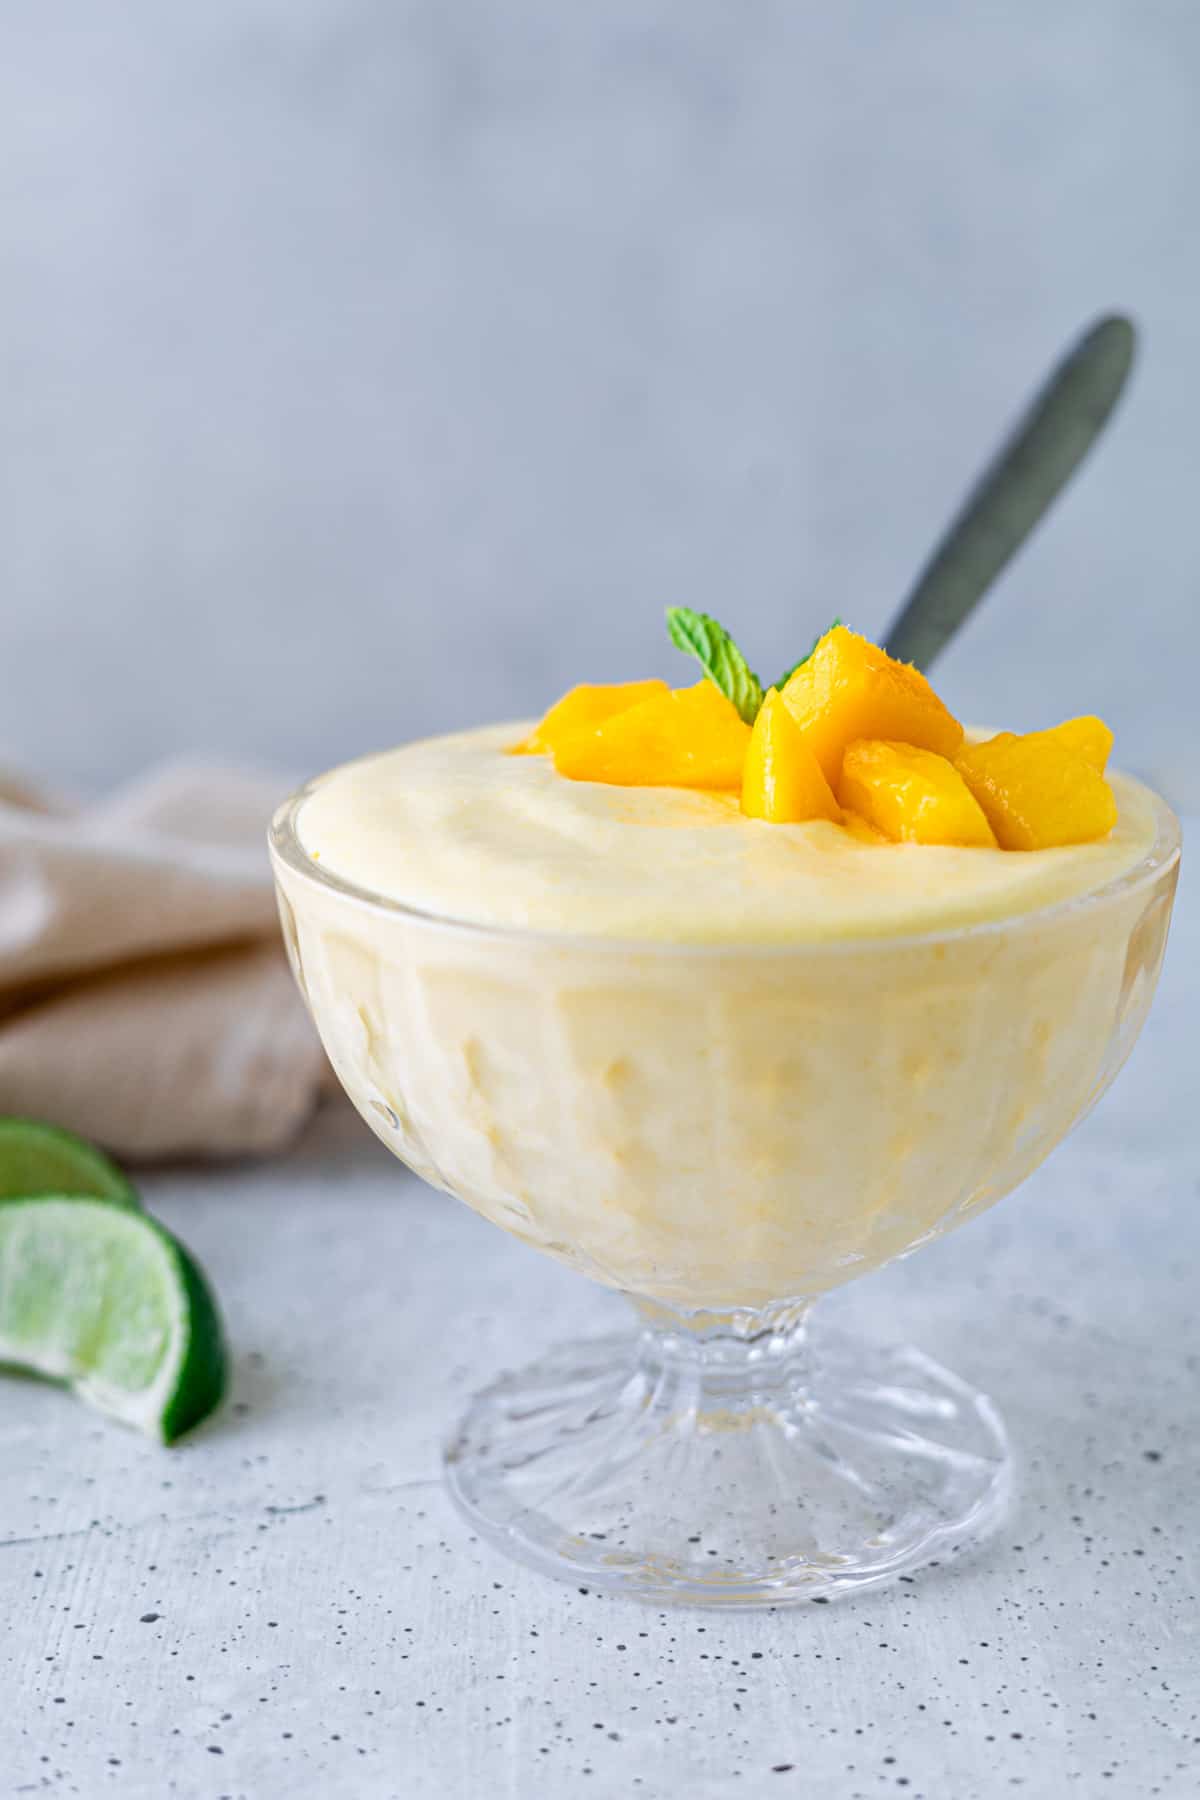 Mango mousse in a dessert glass with fresh mango pieces.